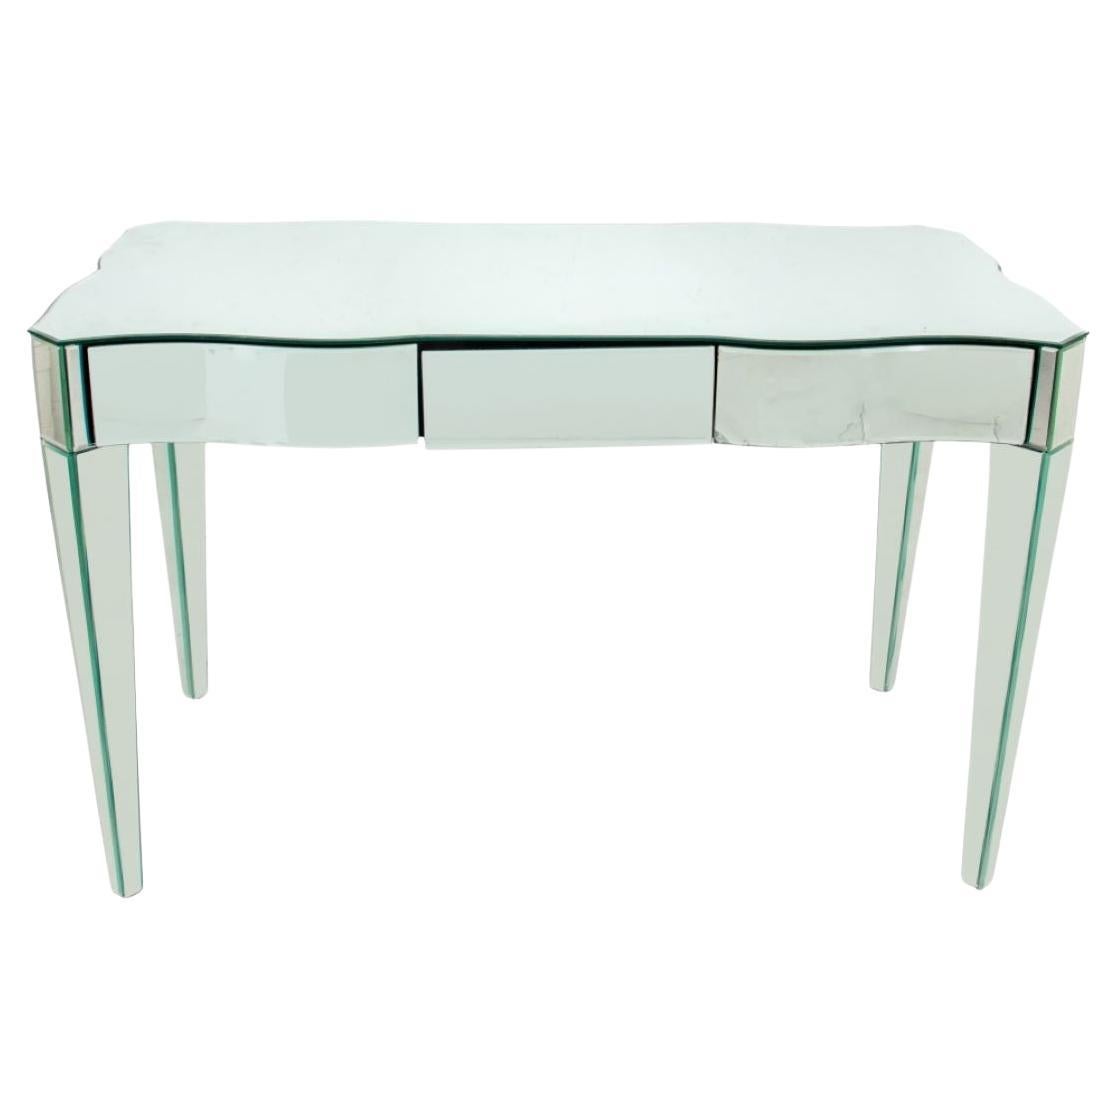 Hollywood Regency Mirrored Small Desk or Vanity For Sale